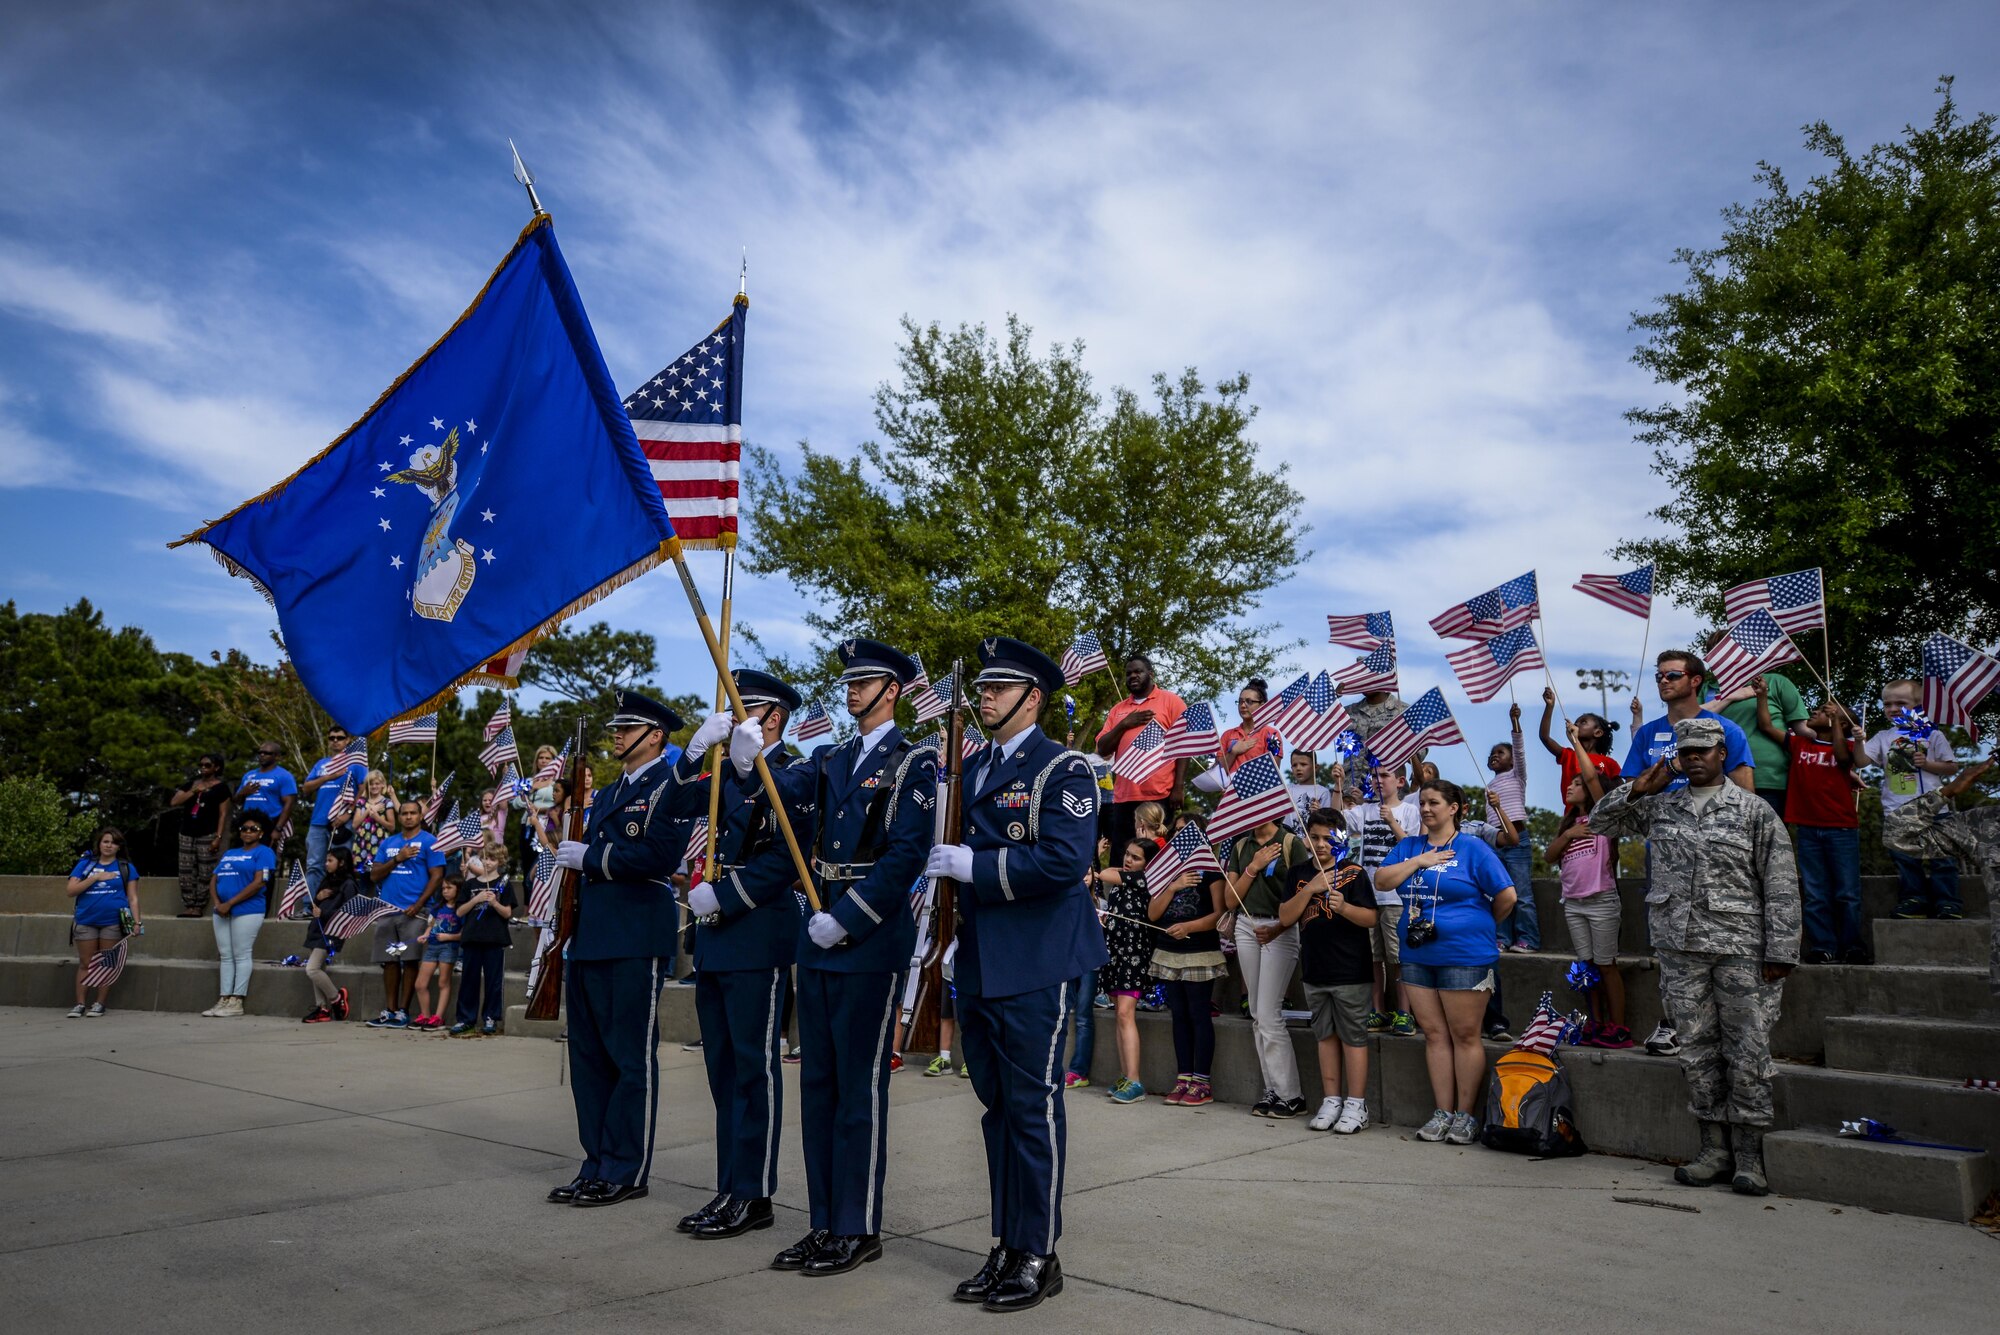 The Hurlburt Field Honor Guard posts the colors during the Month of the Military Child and Child Abuse Prevention Month kickoff on Hurlburt Field, Fla., April 1, 2015. Hurlburt Field is home to more than 5,500 children who face unique challenges related to military life and culture. (U.S. Air Force photo/Senior Airman Christopher Callaway)